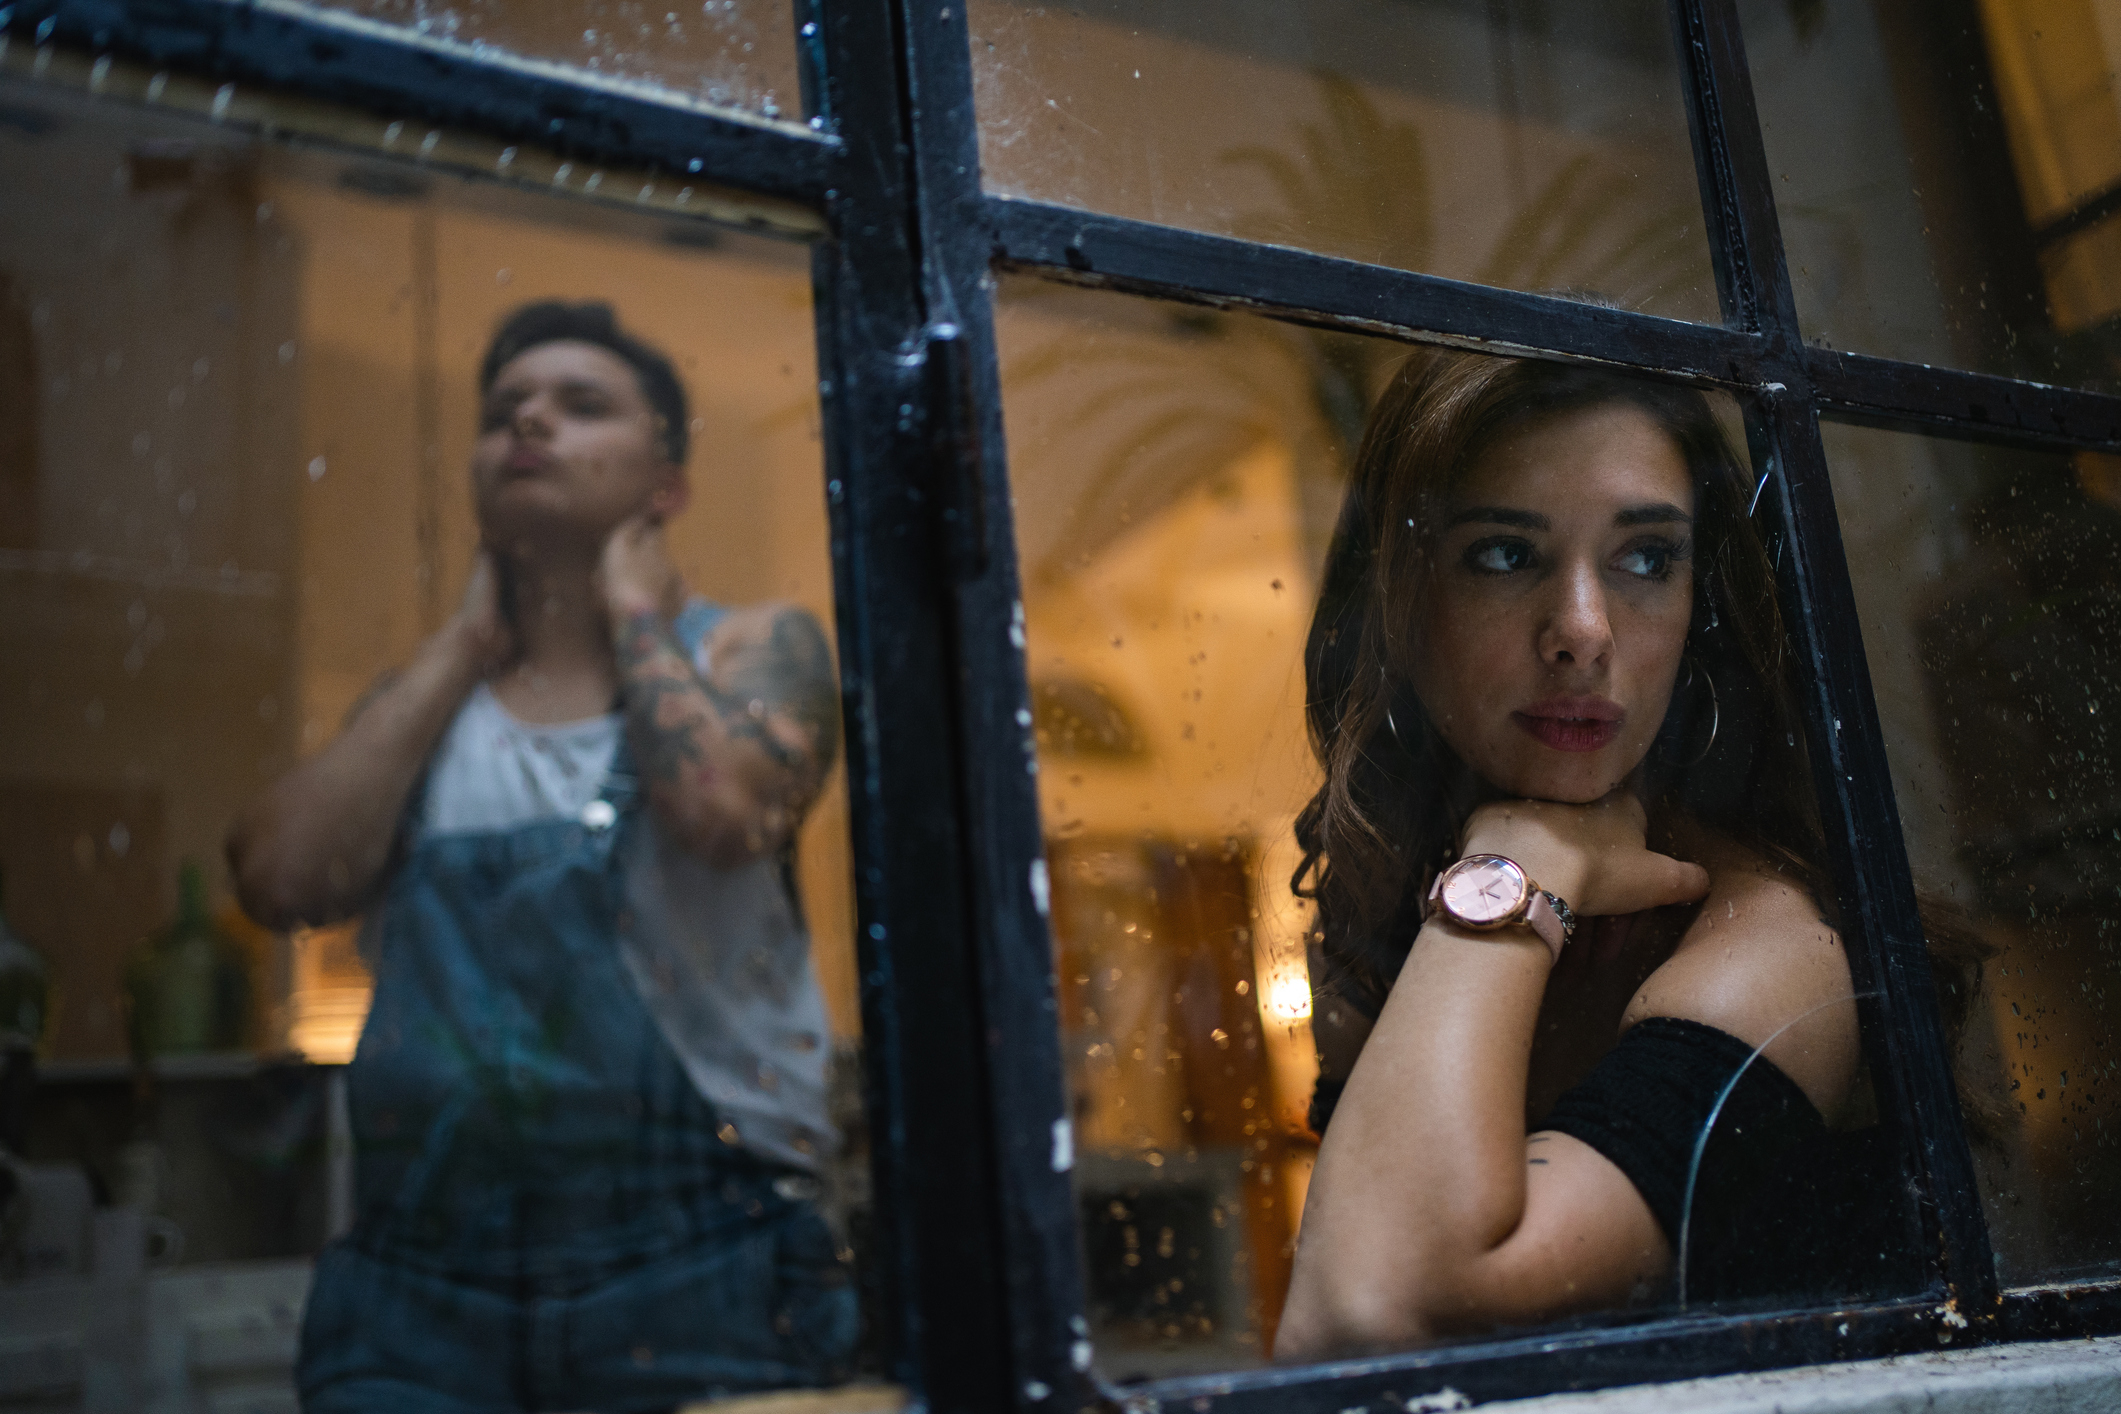 A man shaves by a window while a woman gazes outward, reflecting on their relationship